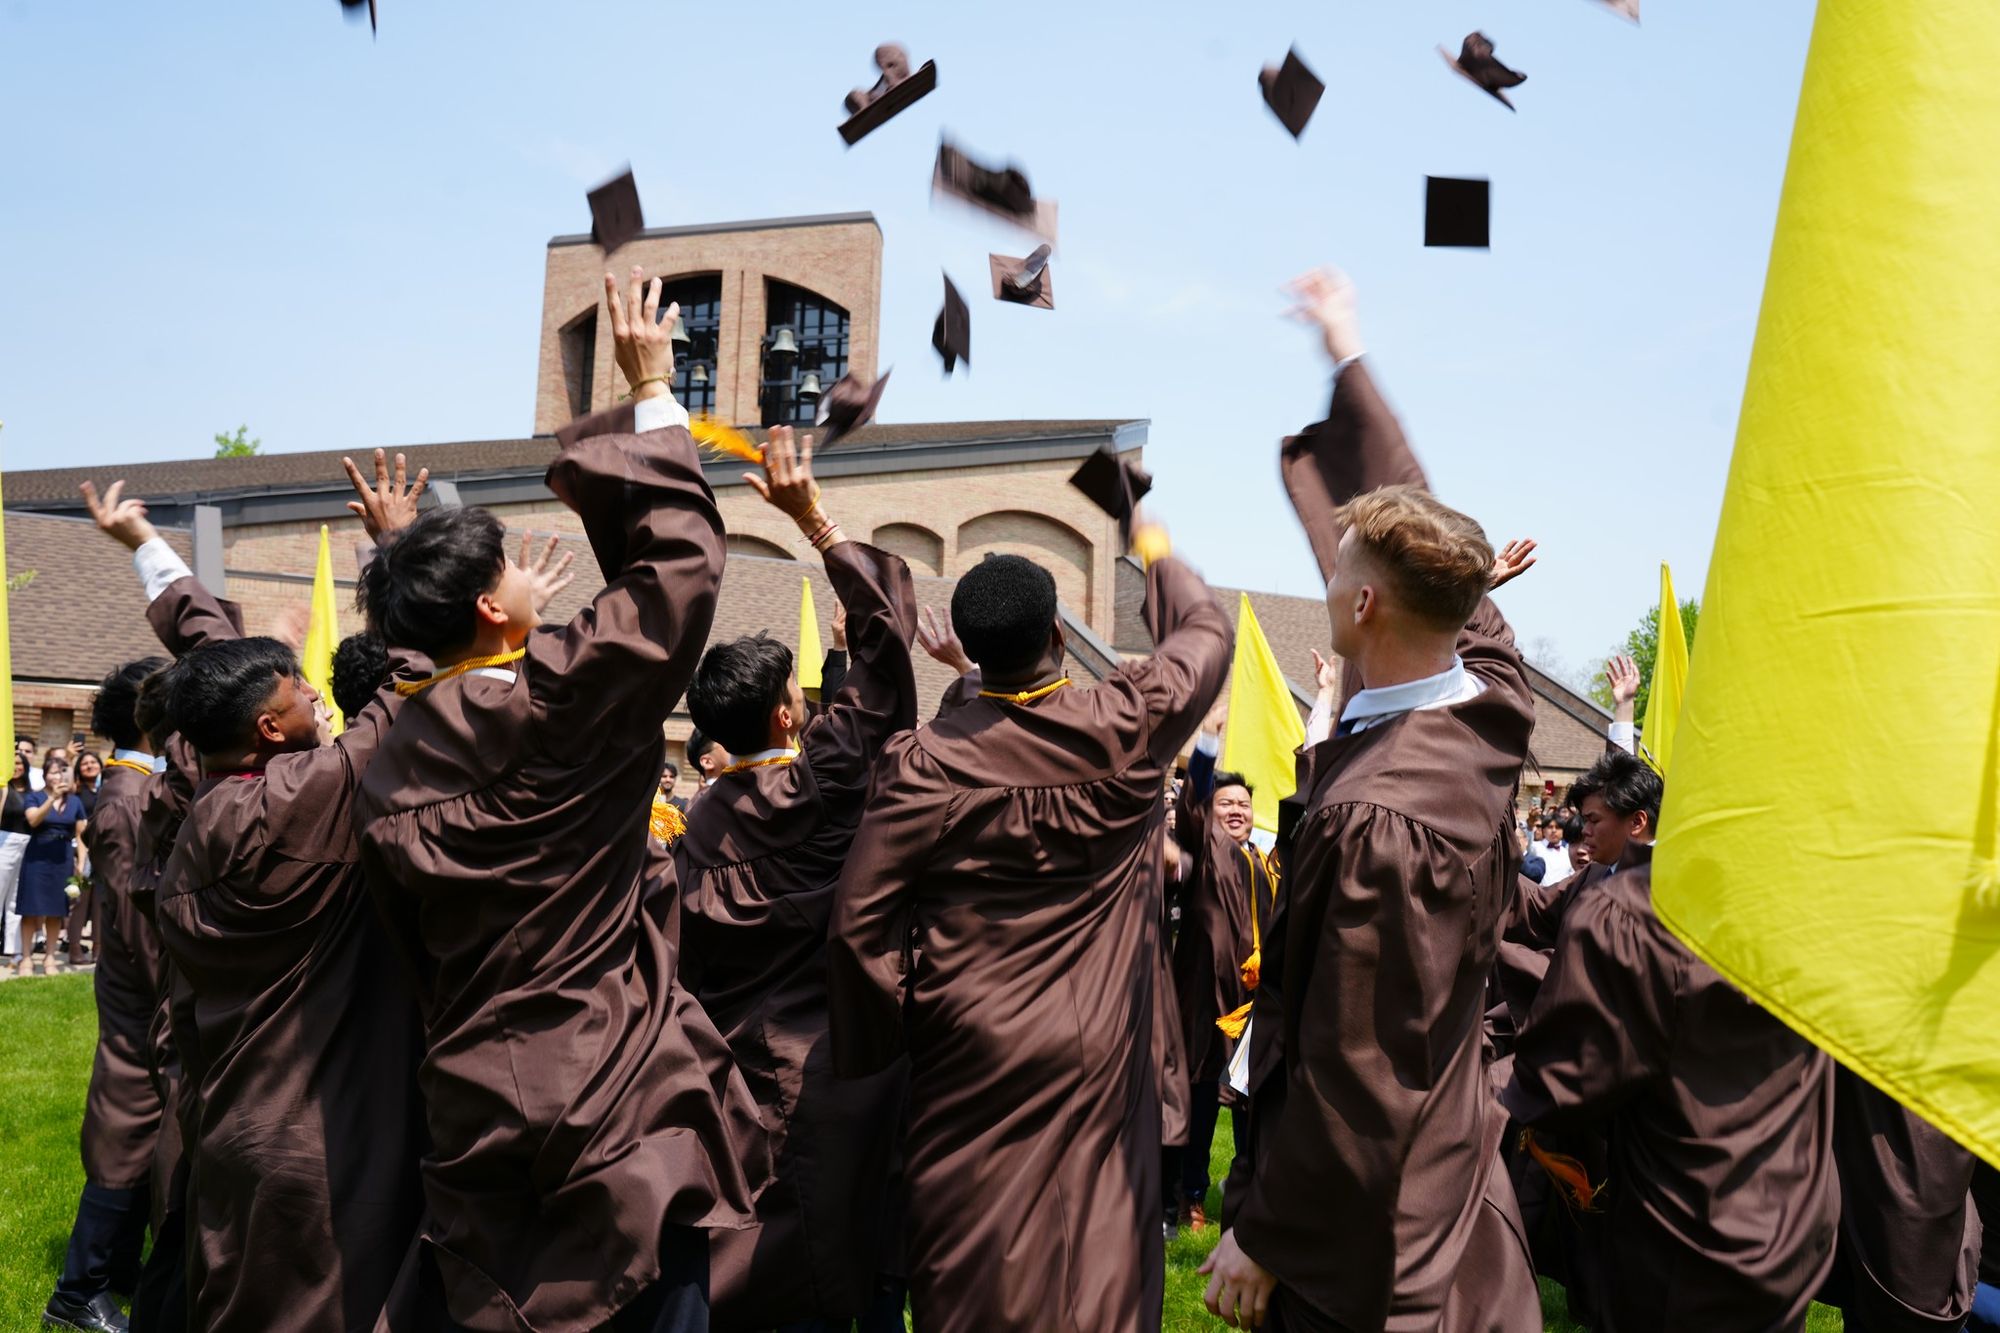 Photo of St. Lawrence graduates in the diag dressed in caps and gowns tossing their caps in the air after graduation.